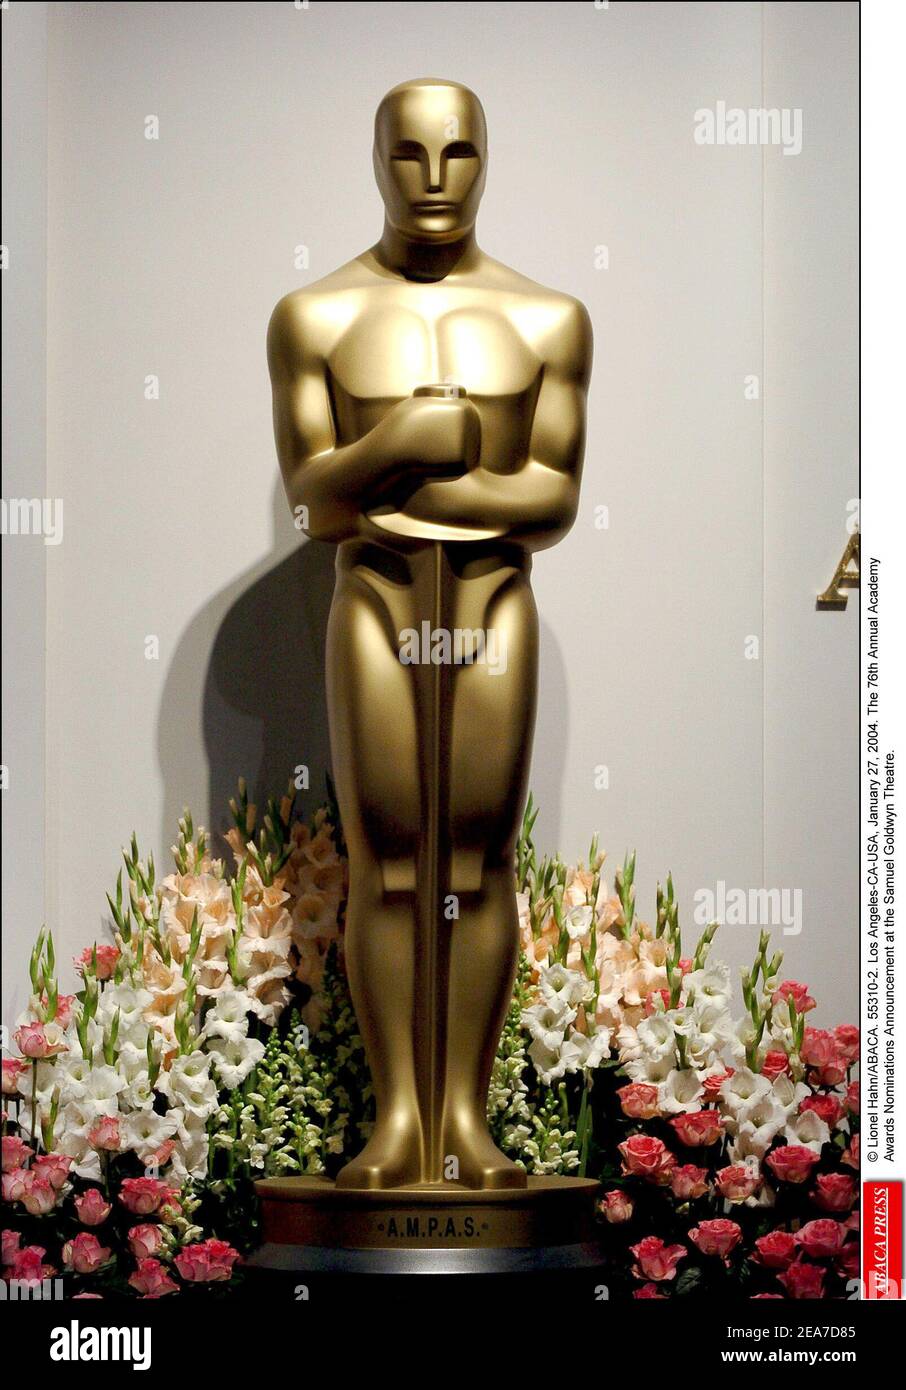 © Lionel Hahn/ABACA. 55310-2. Los Angeles-CA-USA, January 27, 2004. The 76th Annual Academy Awards Nominations Announcement at the Samuel Goldwyn Theatre. Stock Photo